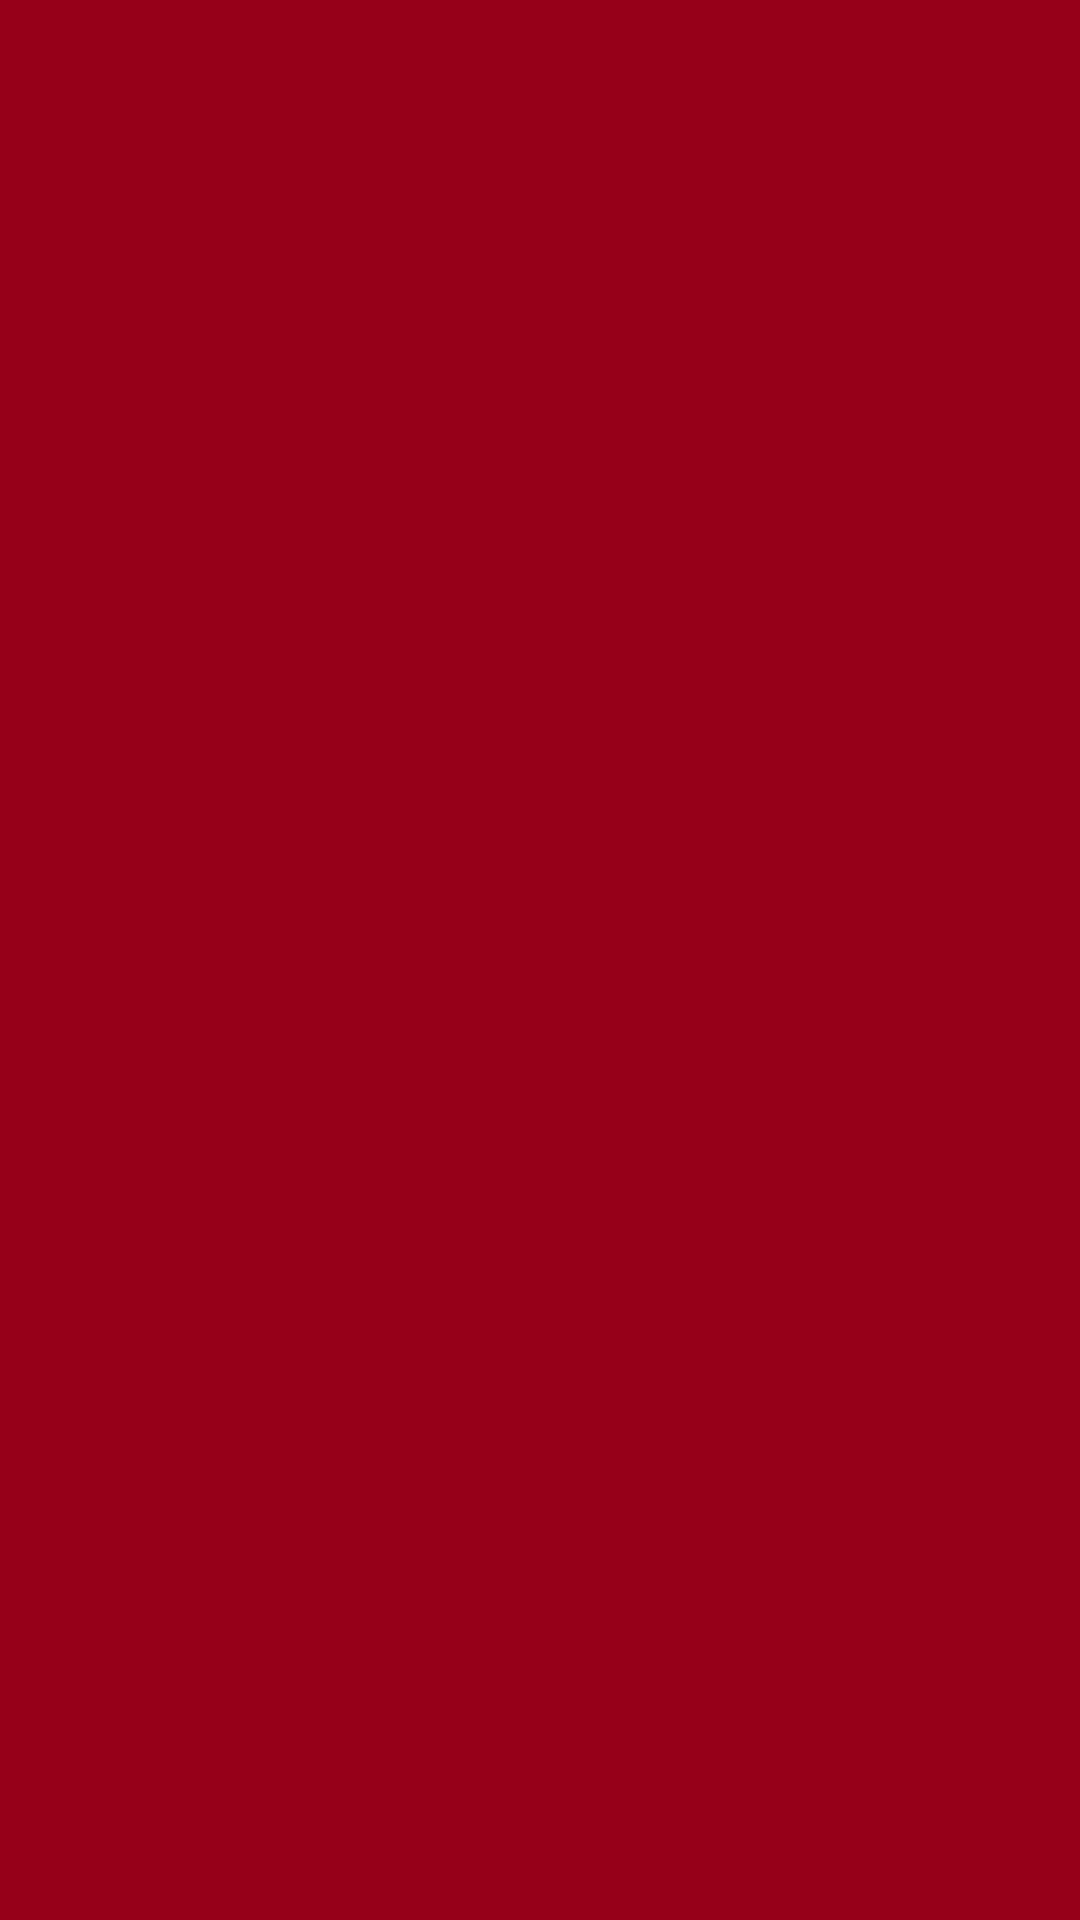 1080x1920 Carmine Solid Color Background